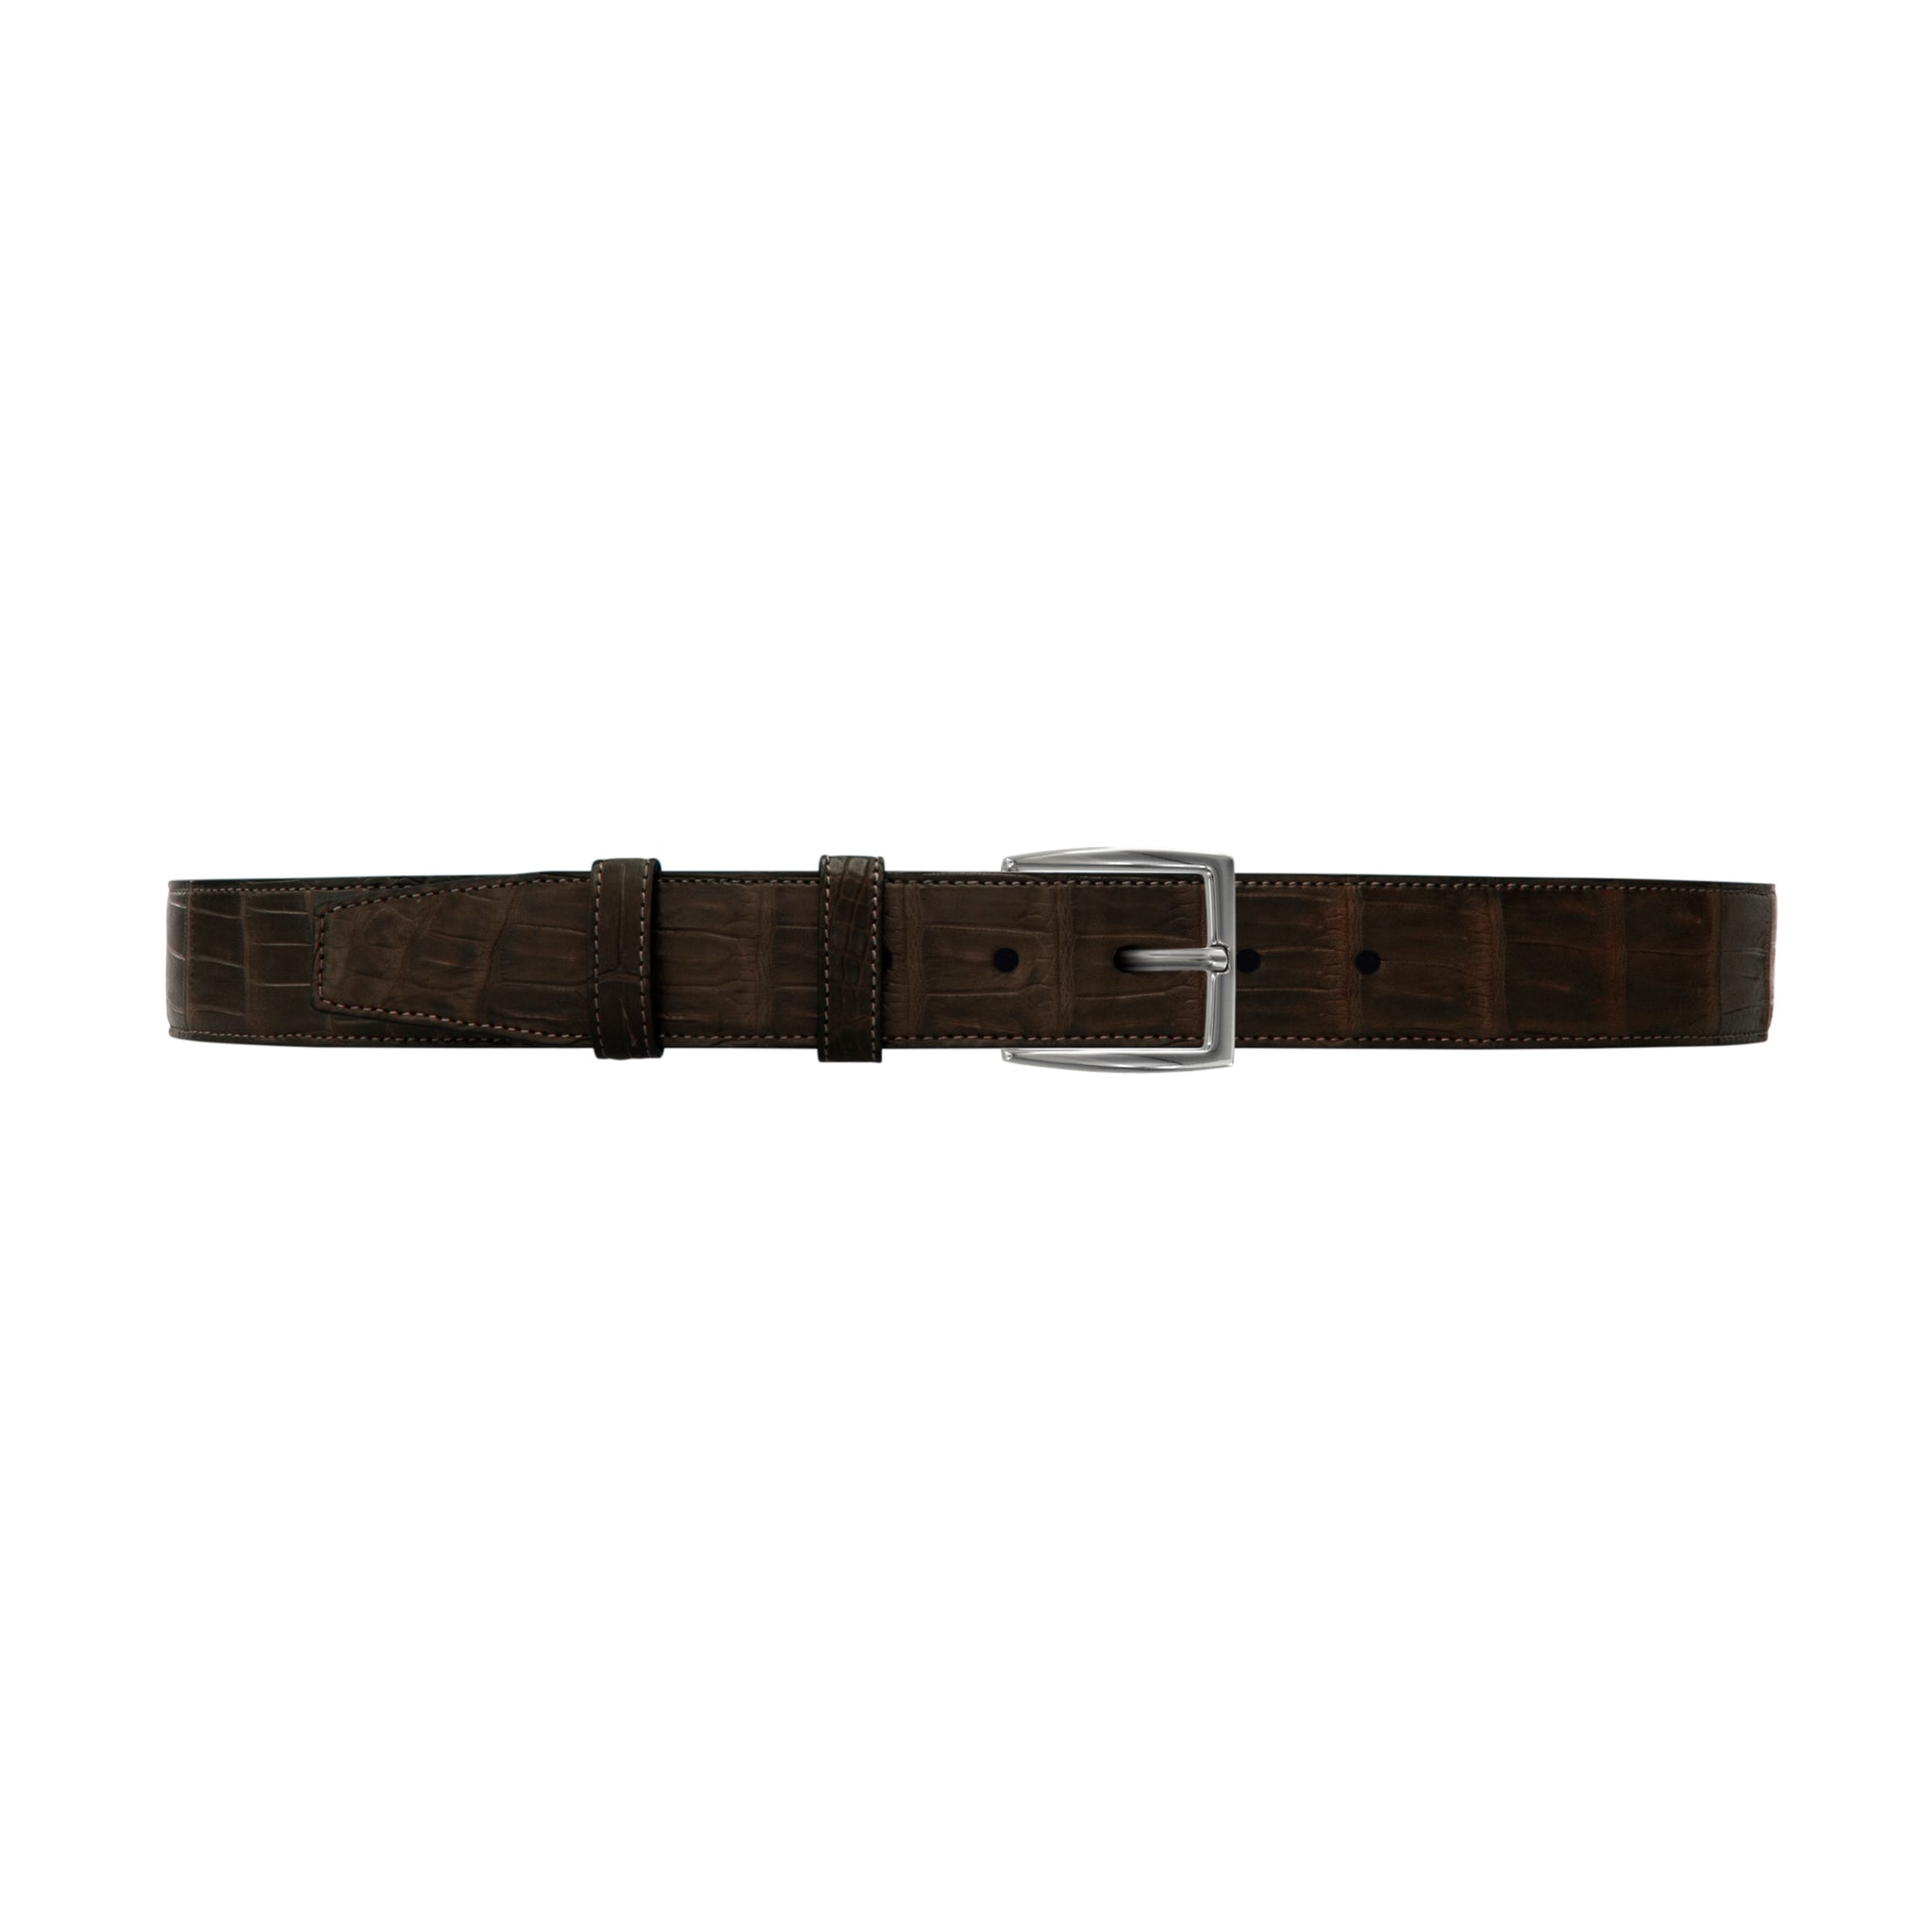 1 1/2" Espresso Classic Belt with Winston Dress Buckle in Polished Nickel